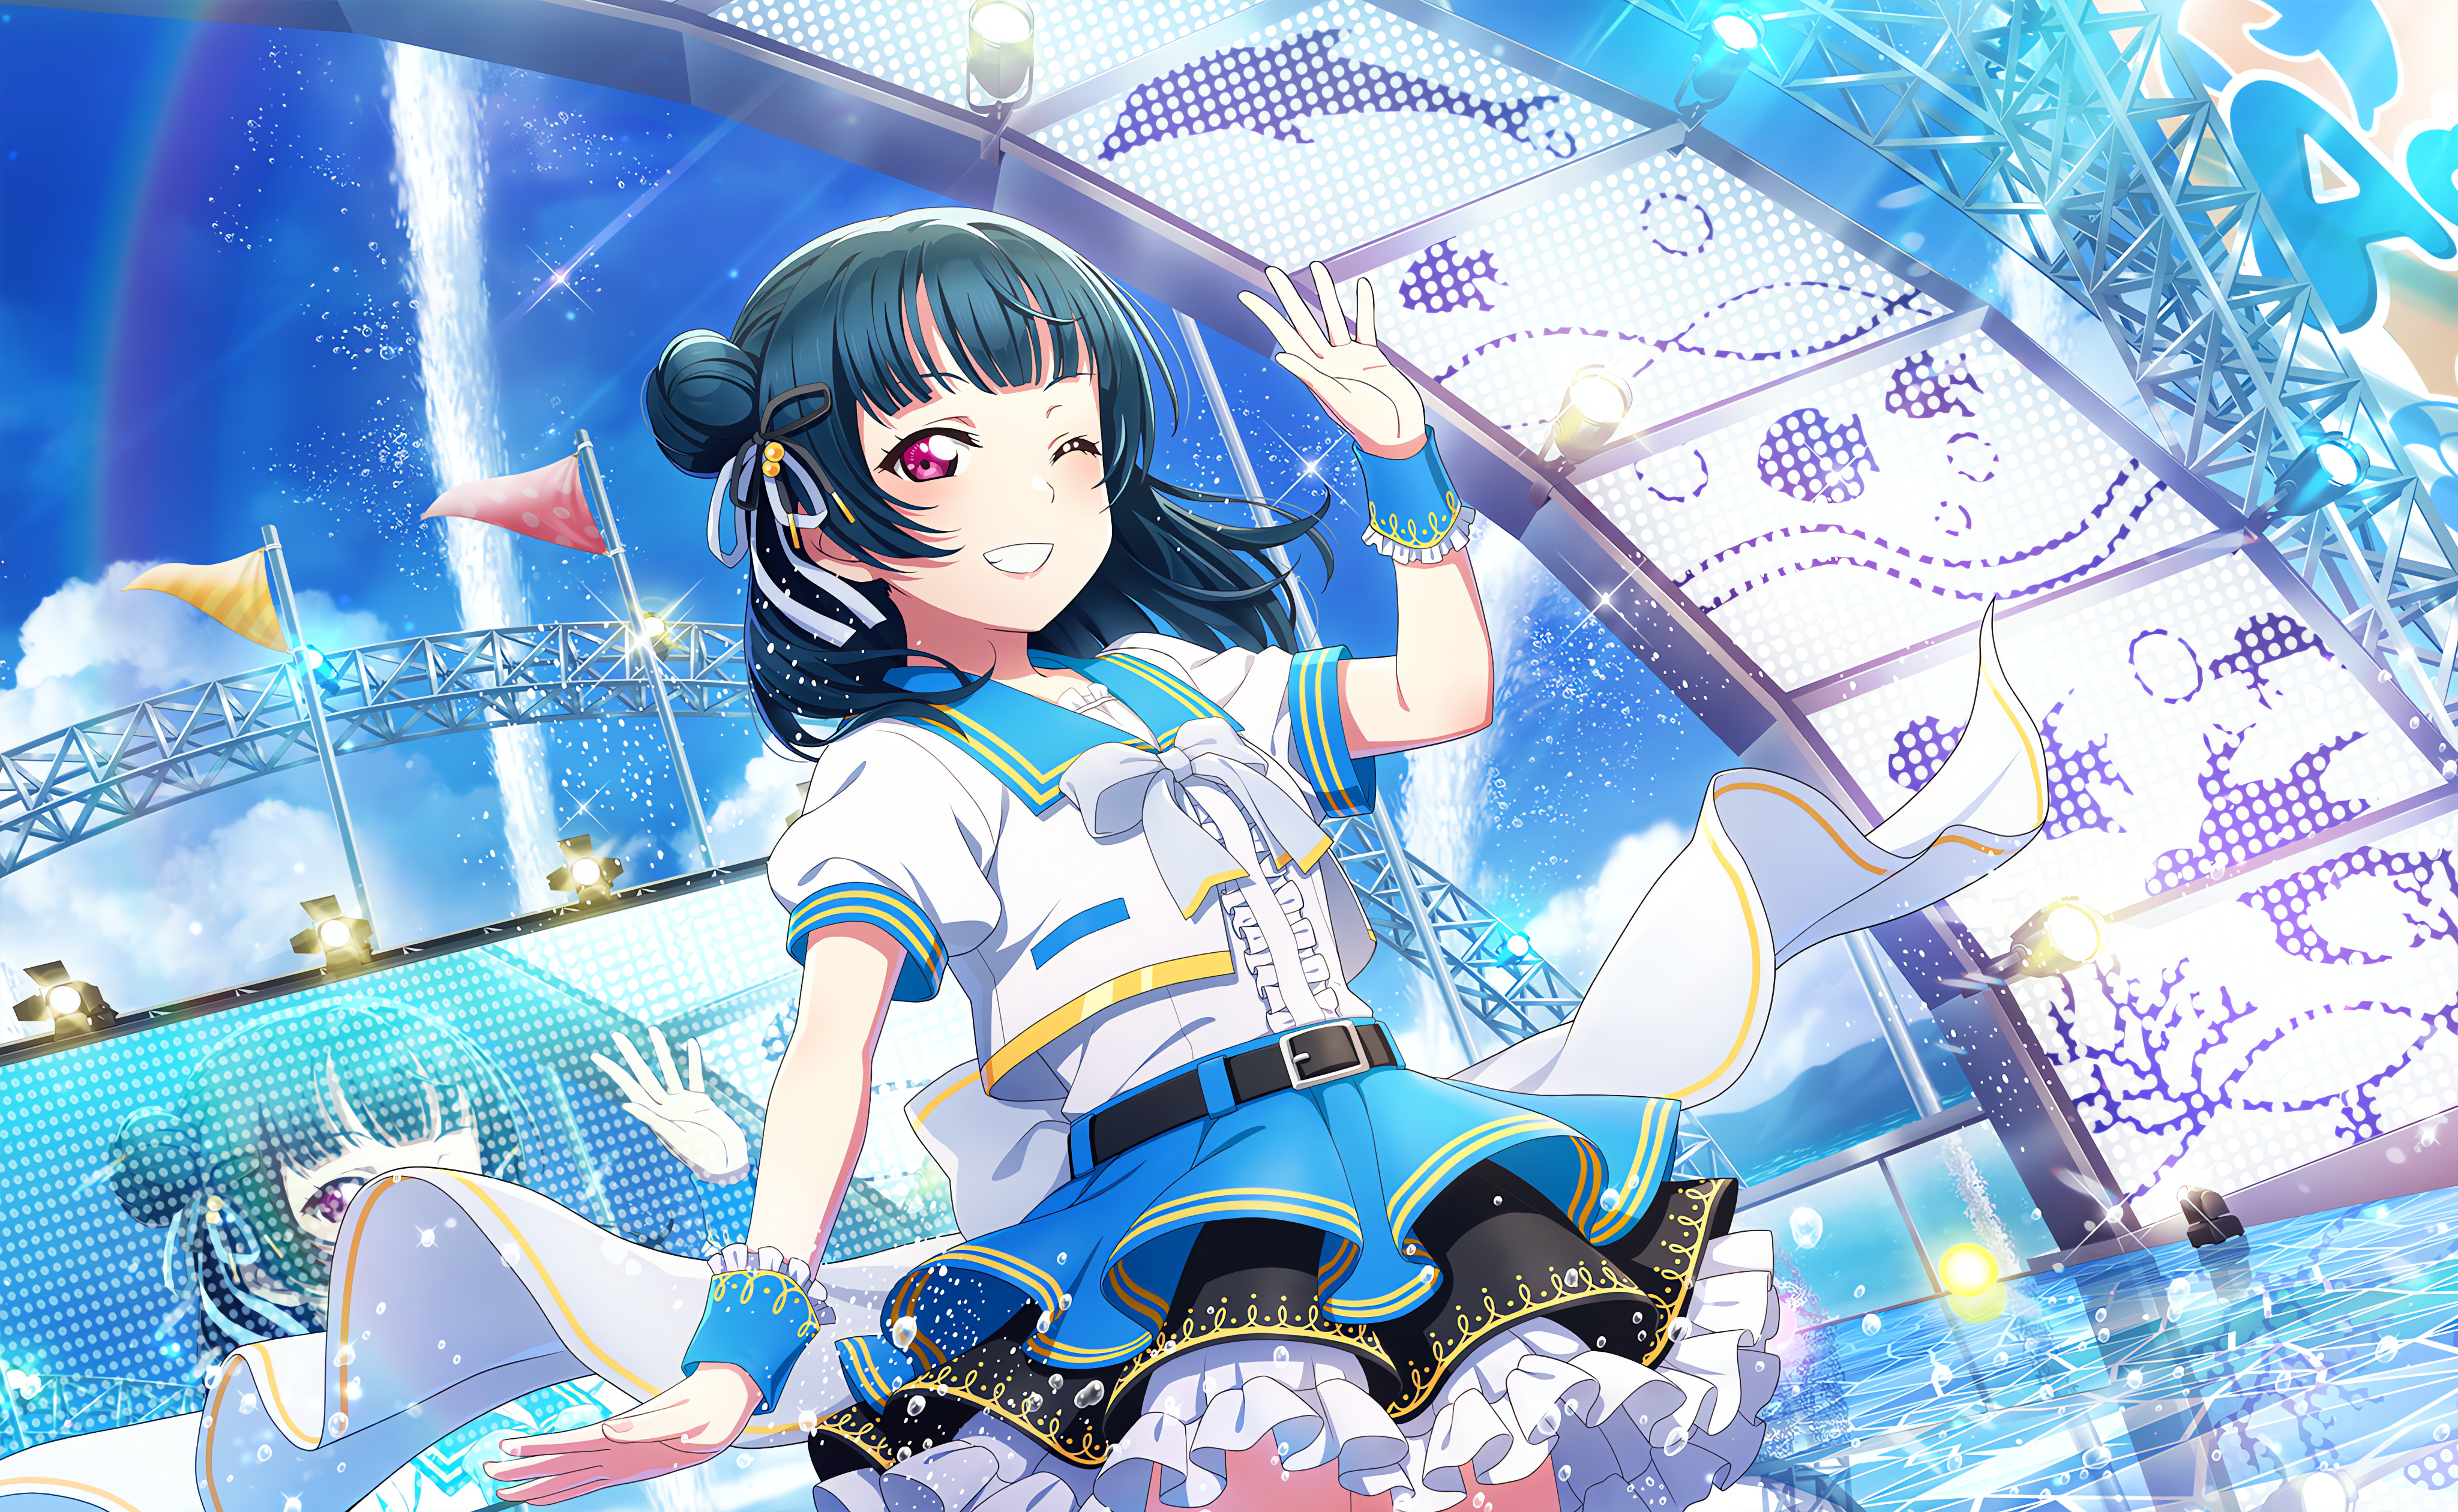 Anime 4096x2520 Tsushima Yoshiko Love Live! Love Live! Sunshine anime anime girls smiling one eye closed hairbun waving rainbows water sky clouds uniform bow tie looking at viewer flag stages stage light